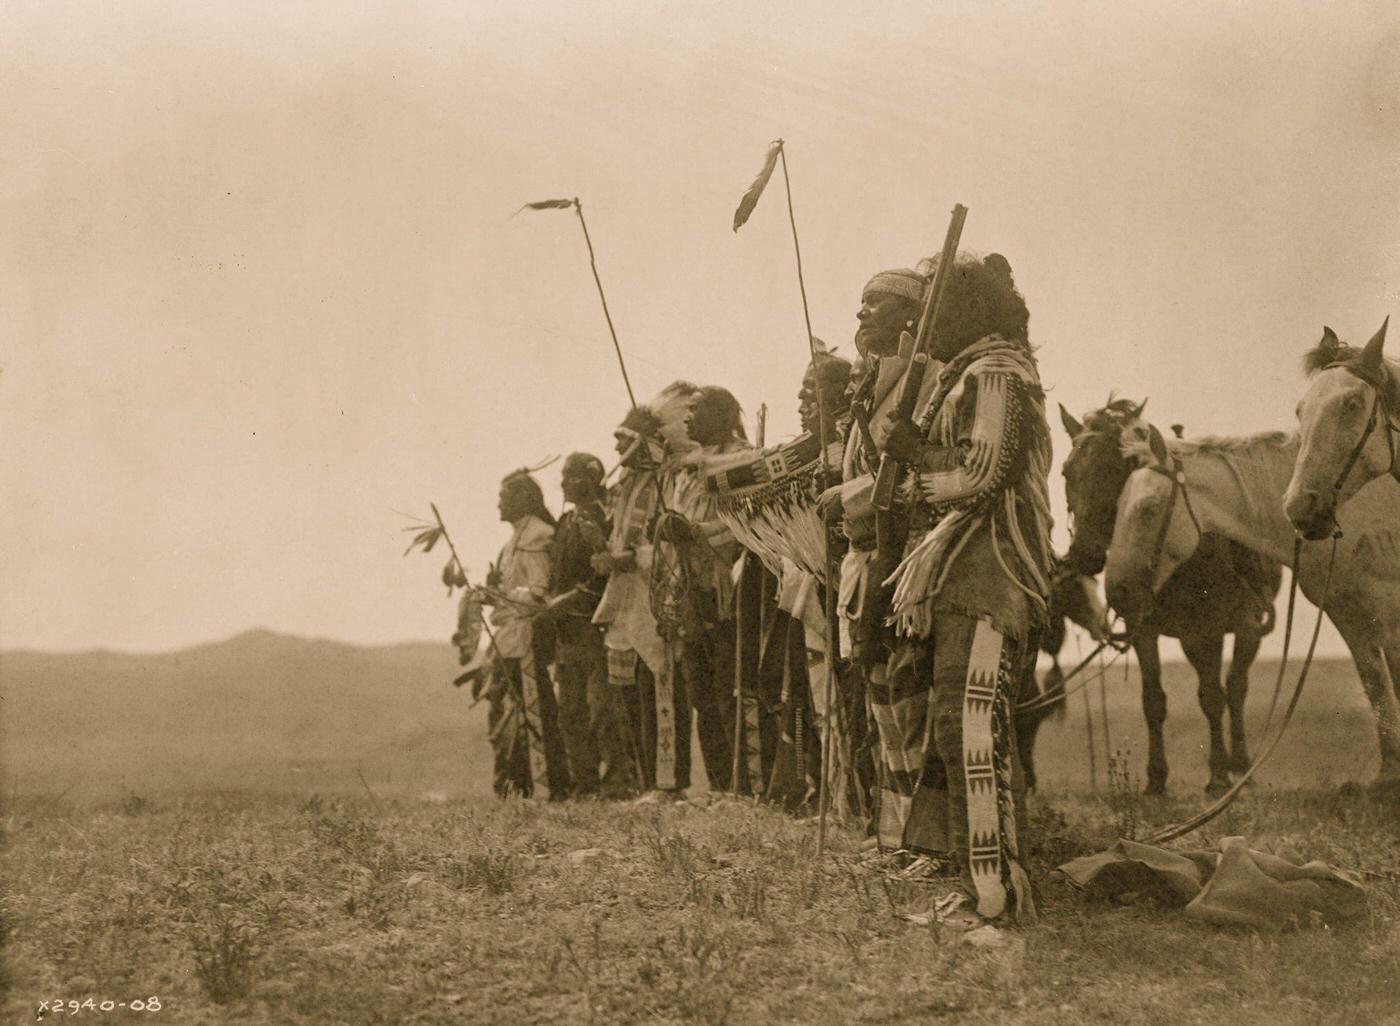 Atsina men on a hill with their horses, 1908